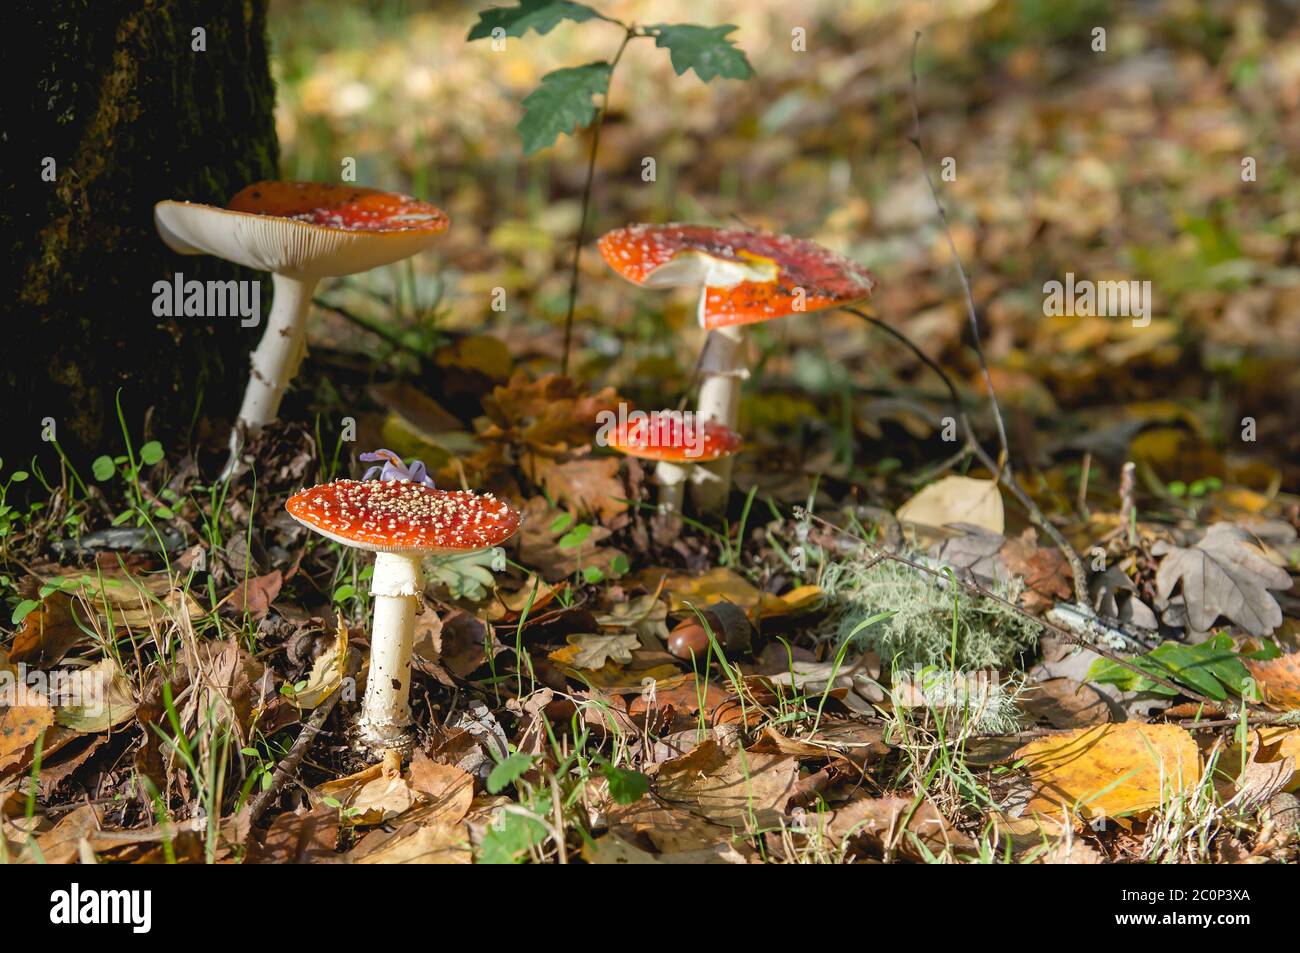 Amanita muscaria or fly agaric mushrooms growing wild in the autumnal woodlands Stock Photo